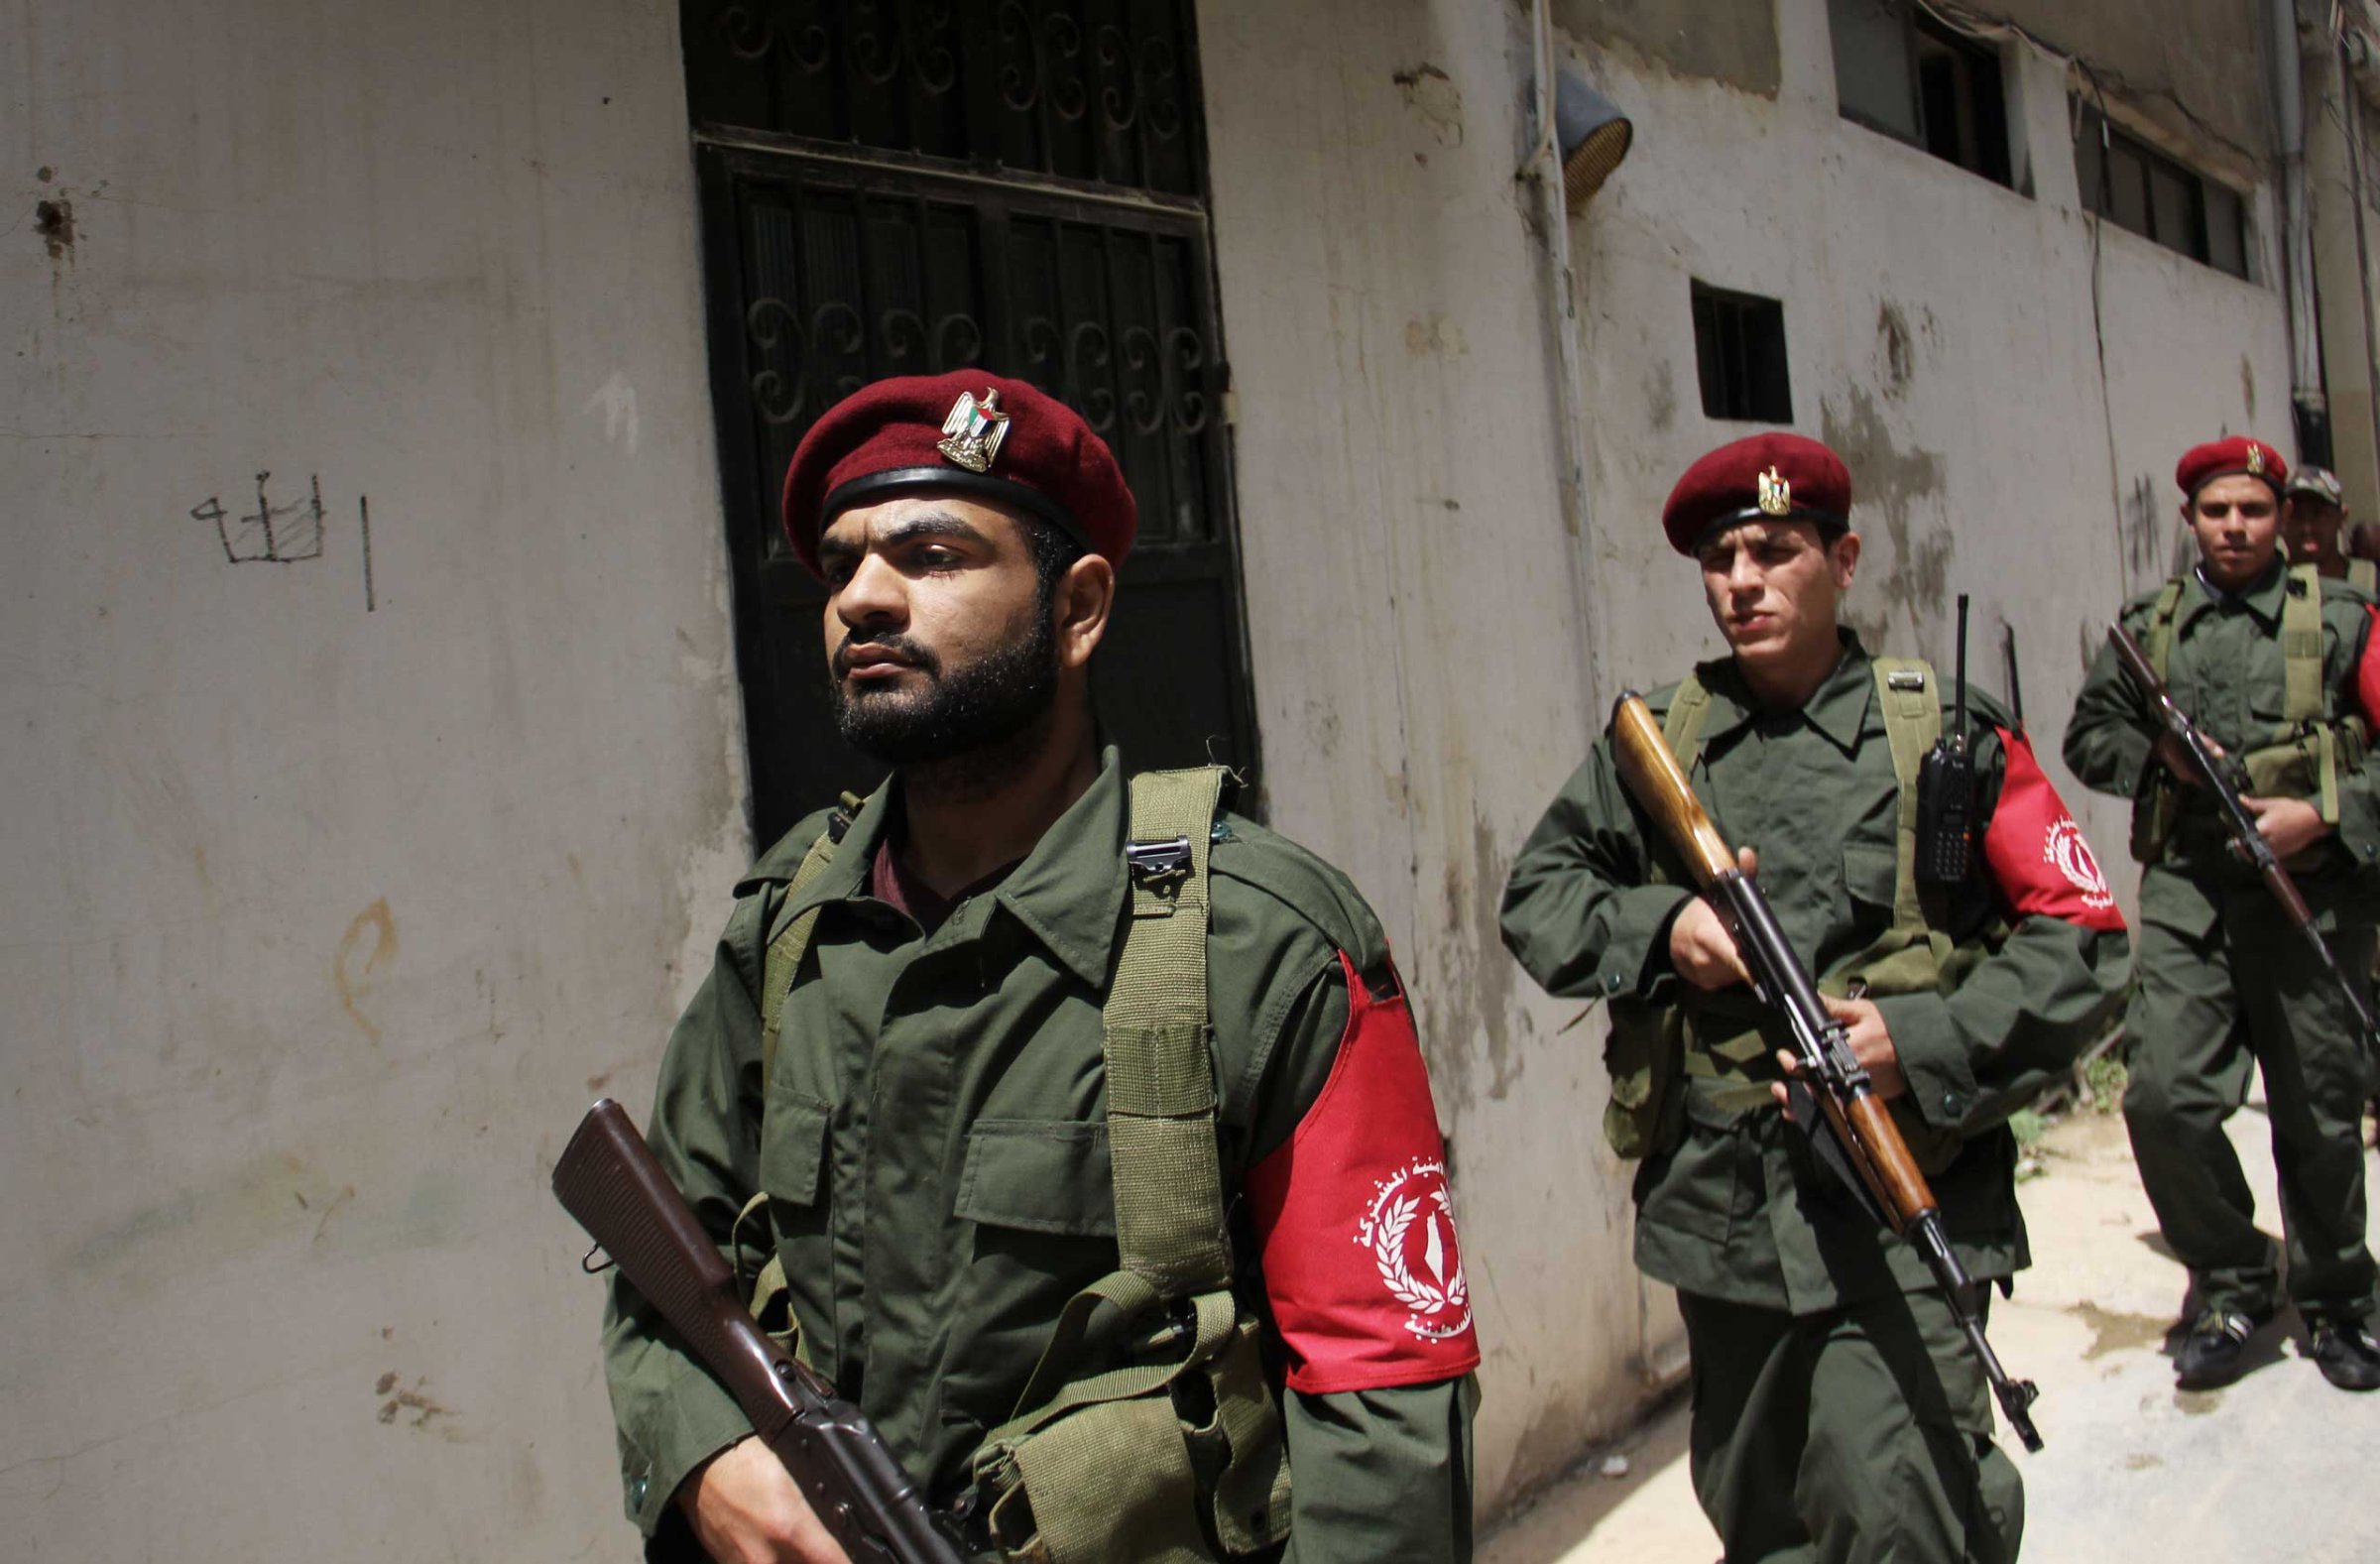 Members of a new Palestinian joint force patrol in Palestinian refugee camp Ain el-Helweh, in Lebanon on April 19, 2015.